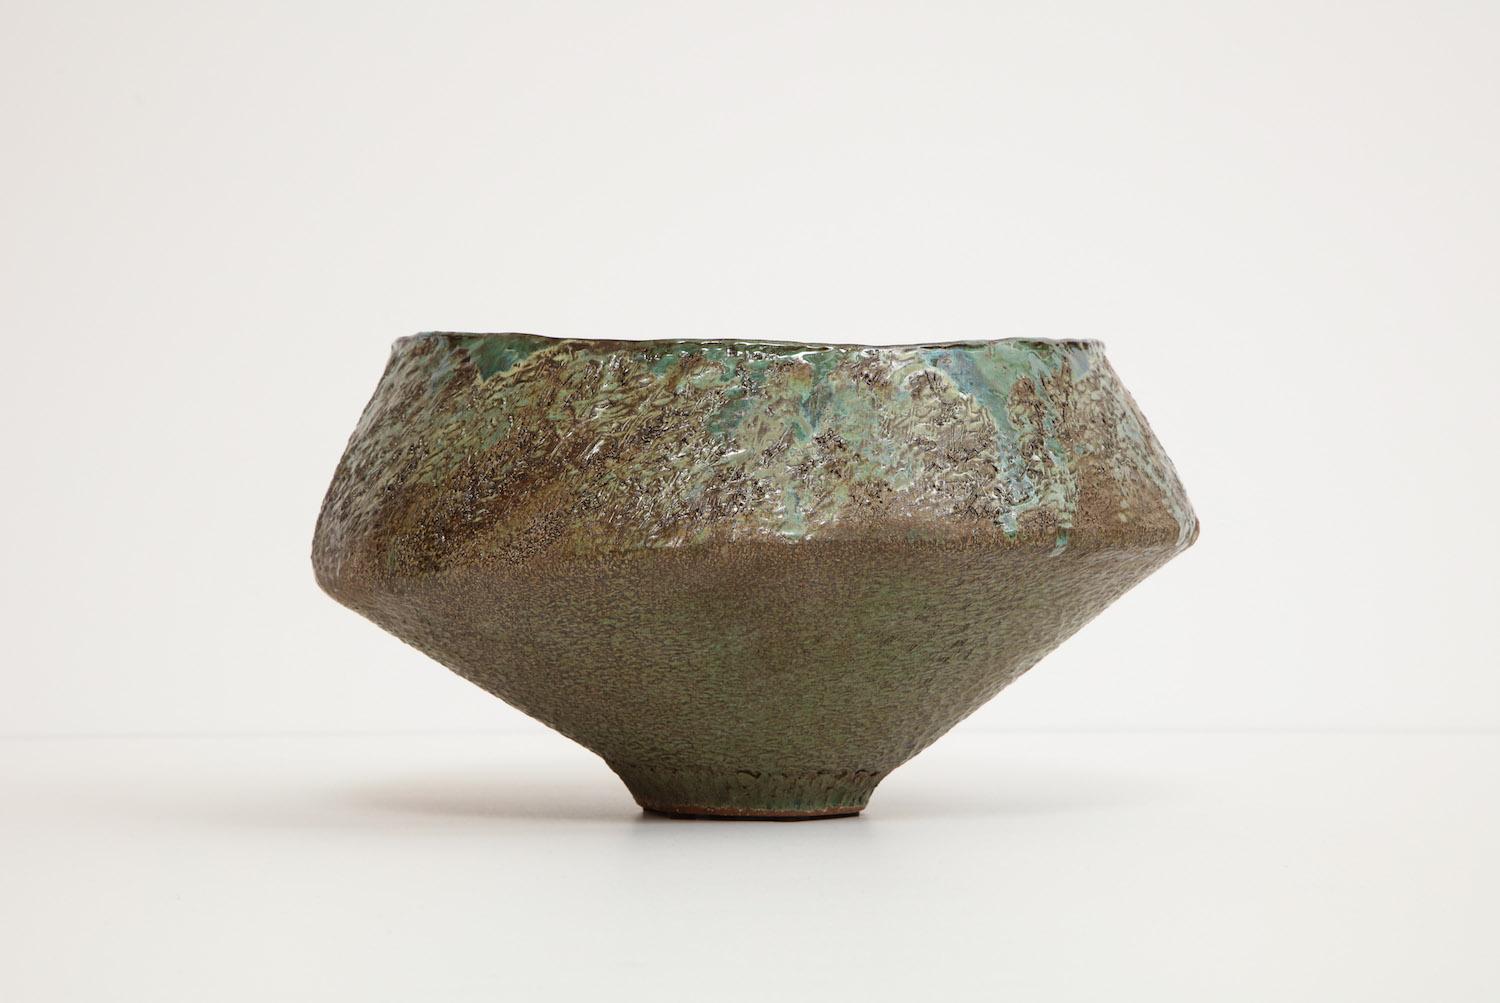 Hand-built centerpiece bowl asymmetric form of glazed stoneware. Signed and dated on underside.